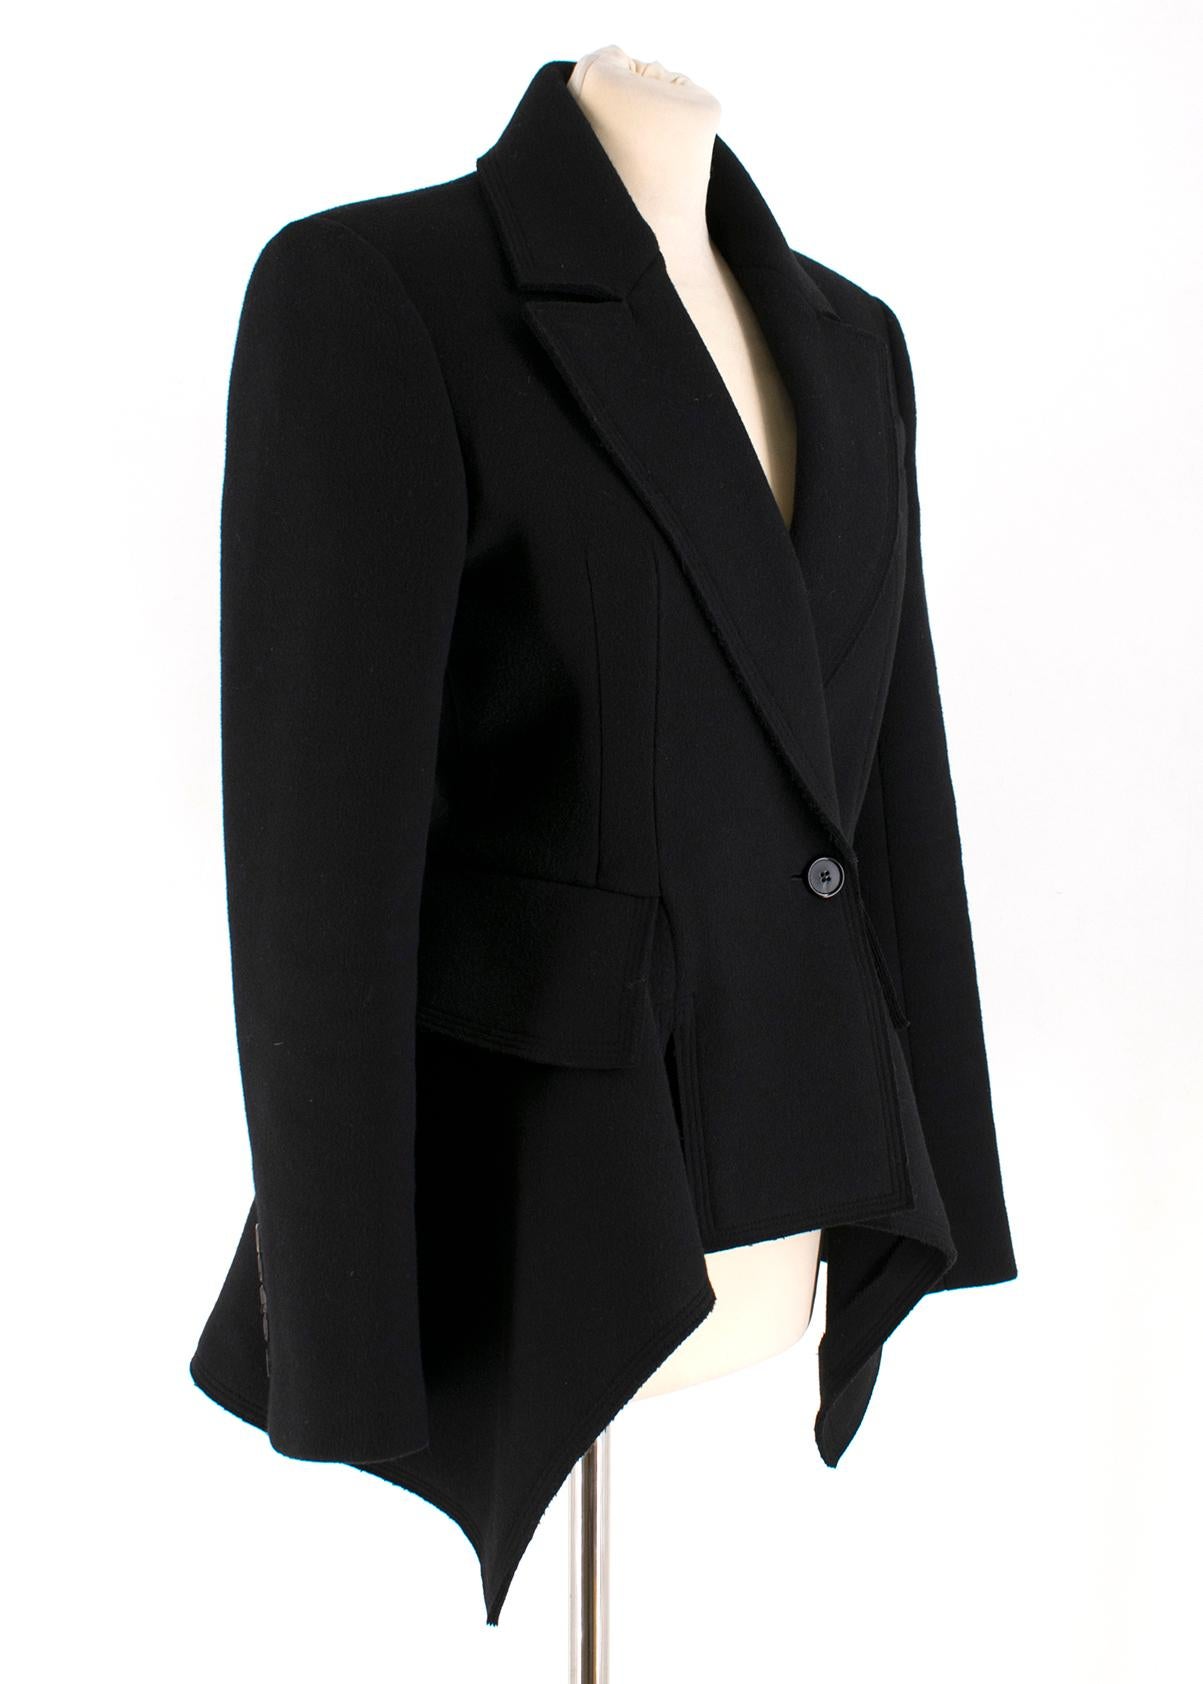 Tom Ford Double Breasted Cashmere Blend Peplum Coat 

- Black wool and cashmere blend 
- 100% silk lining 
- Defining padded shoulders
- Small left breast pocket 
- Button fastening at front 
- Waist defining peplum hem 
- Enlarged flap pockets on